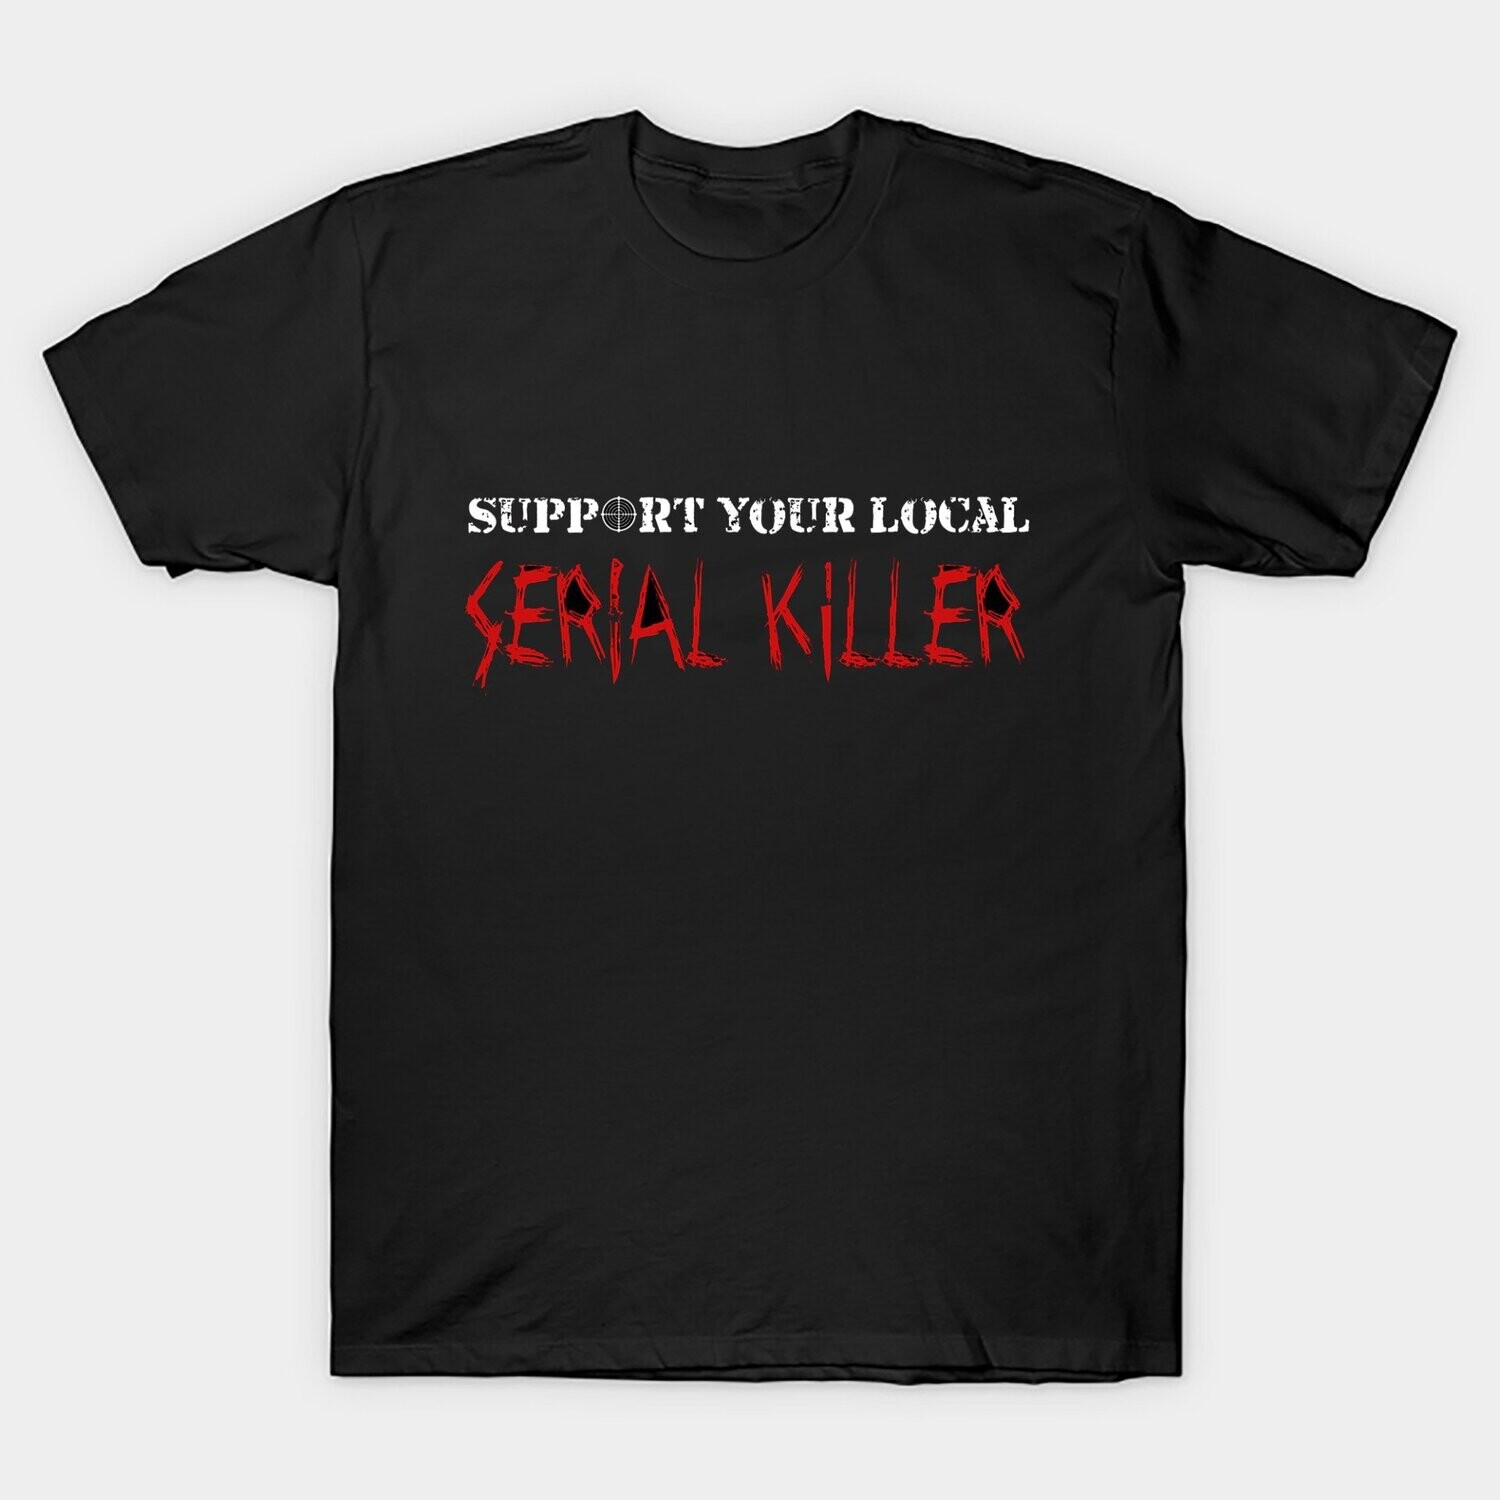 Support your local SK t-shirt